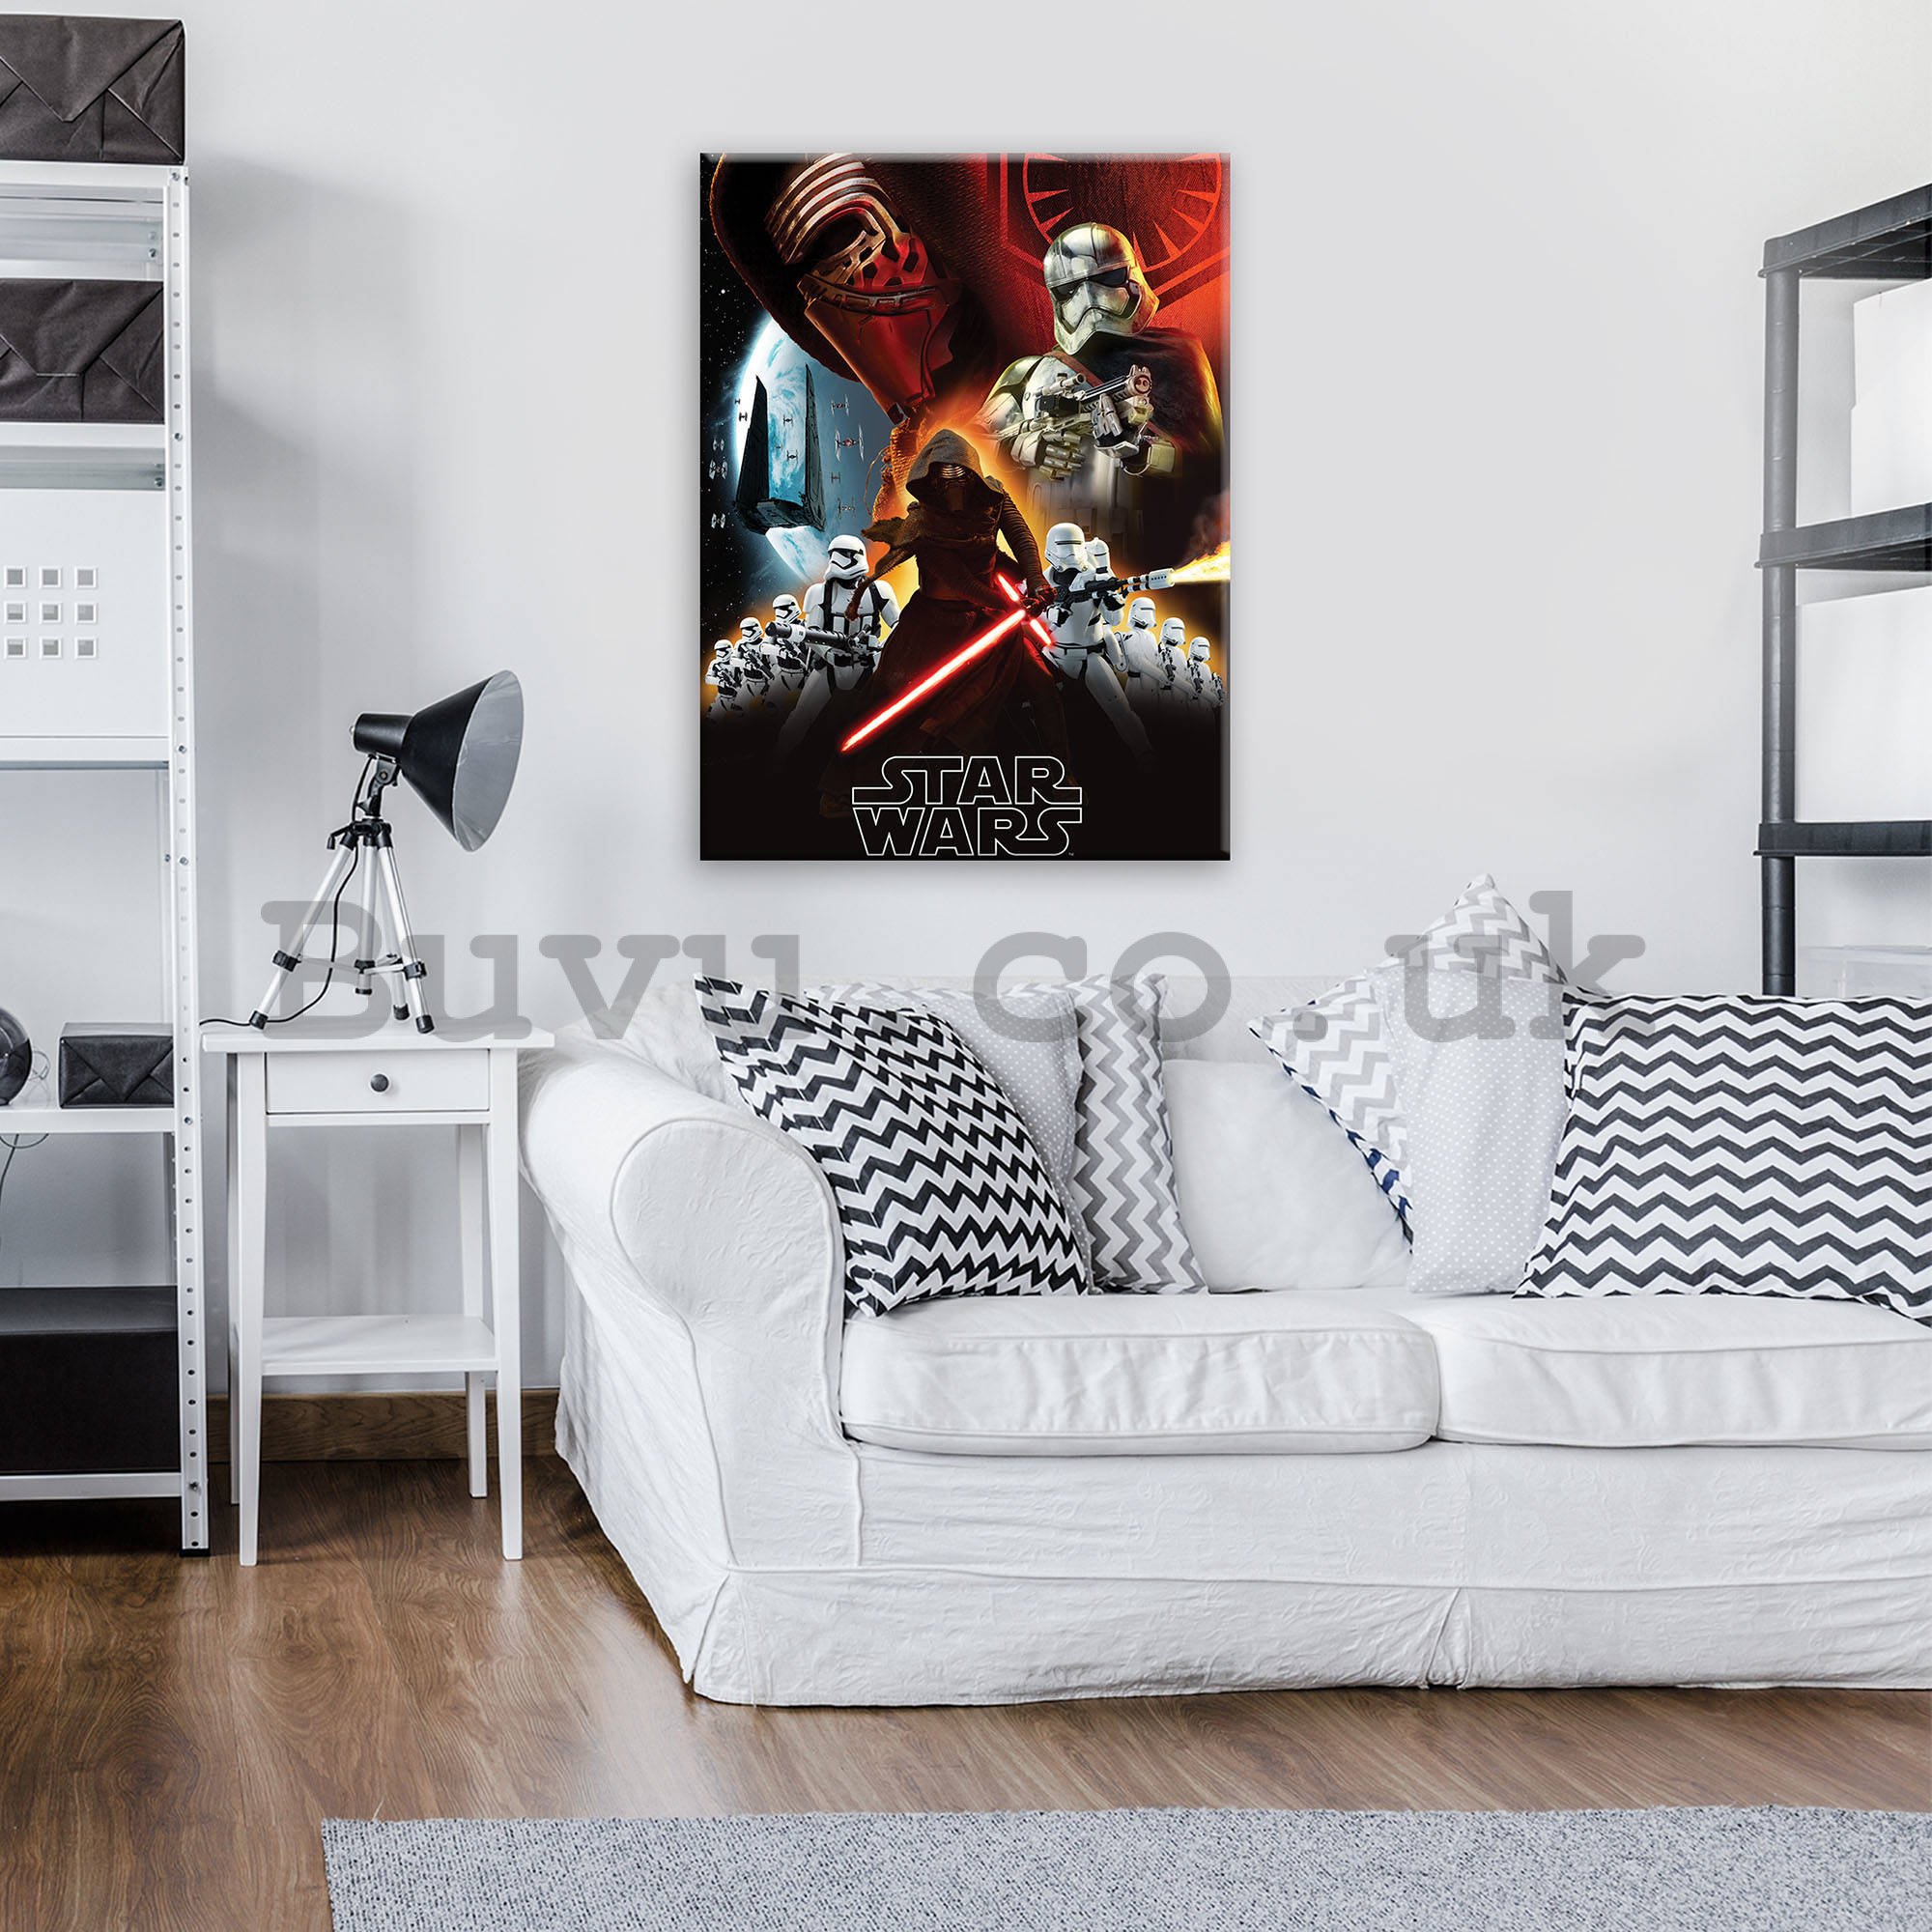 Painting on canvas: Star Wars First Order (2) - 80x60 cm